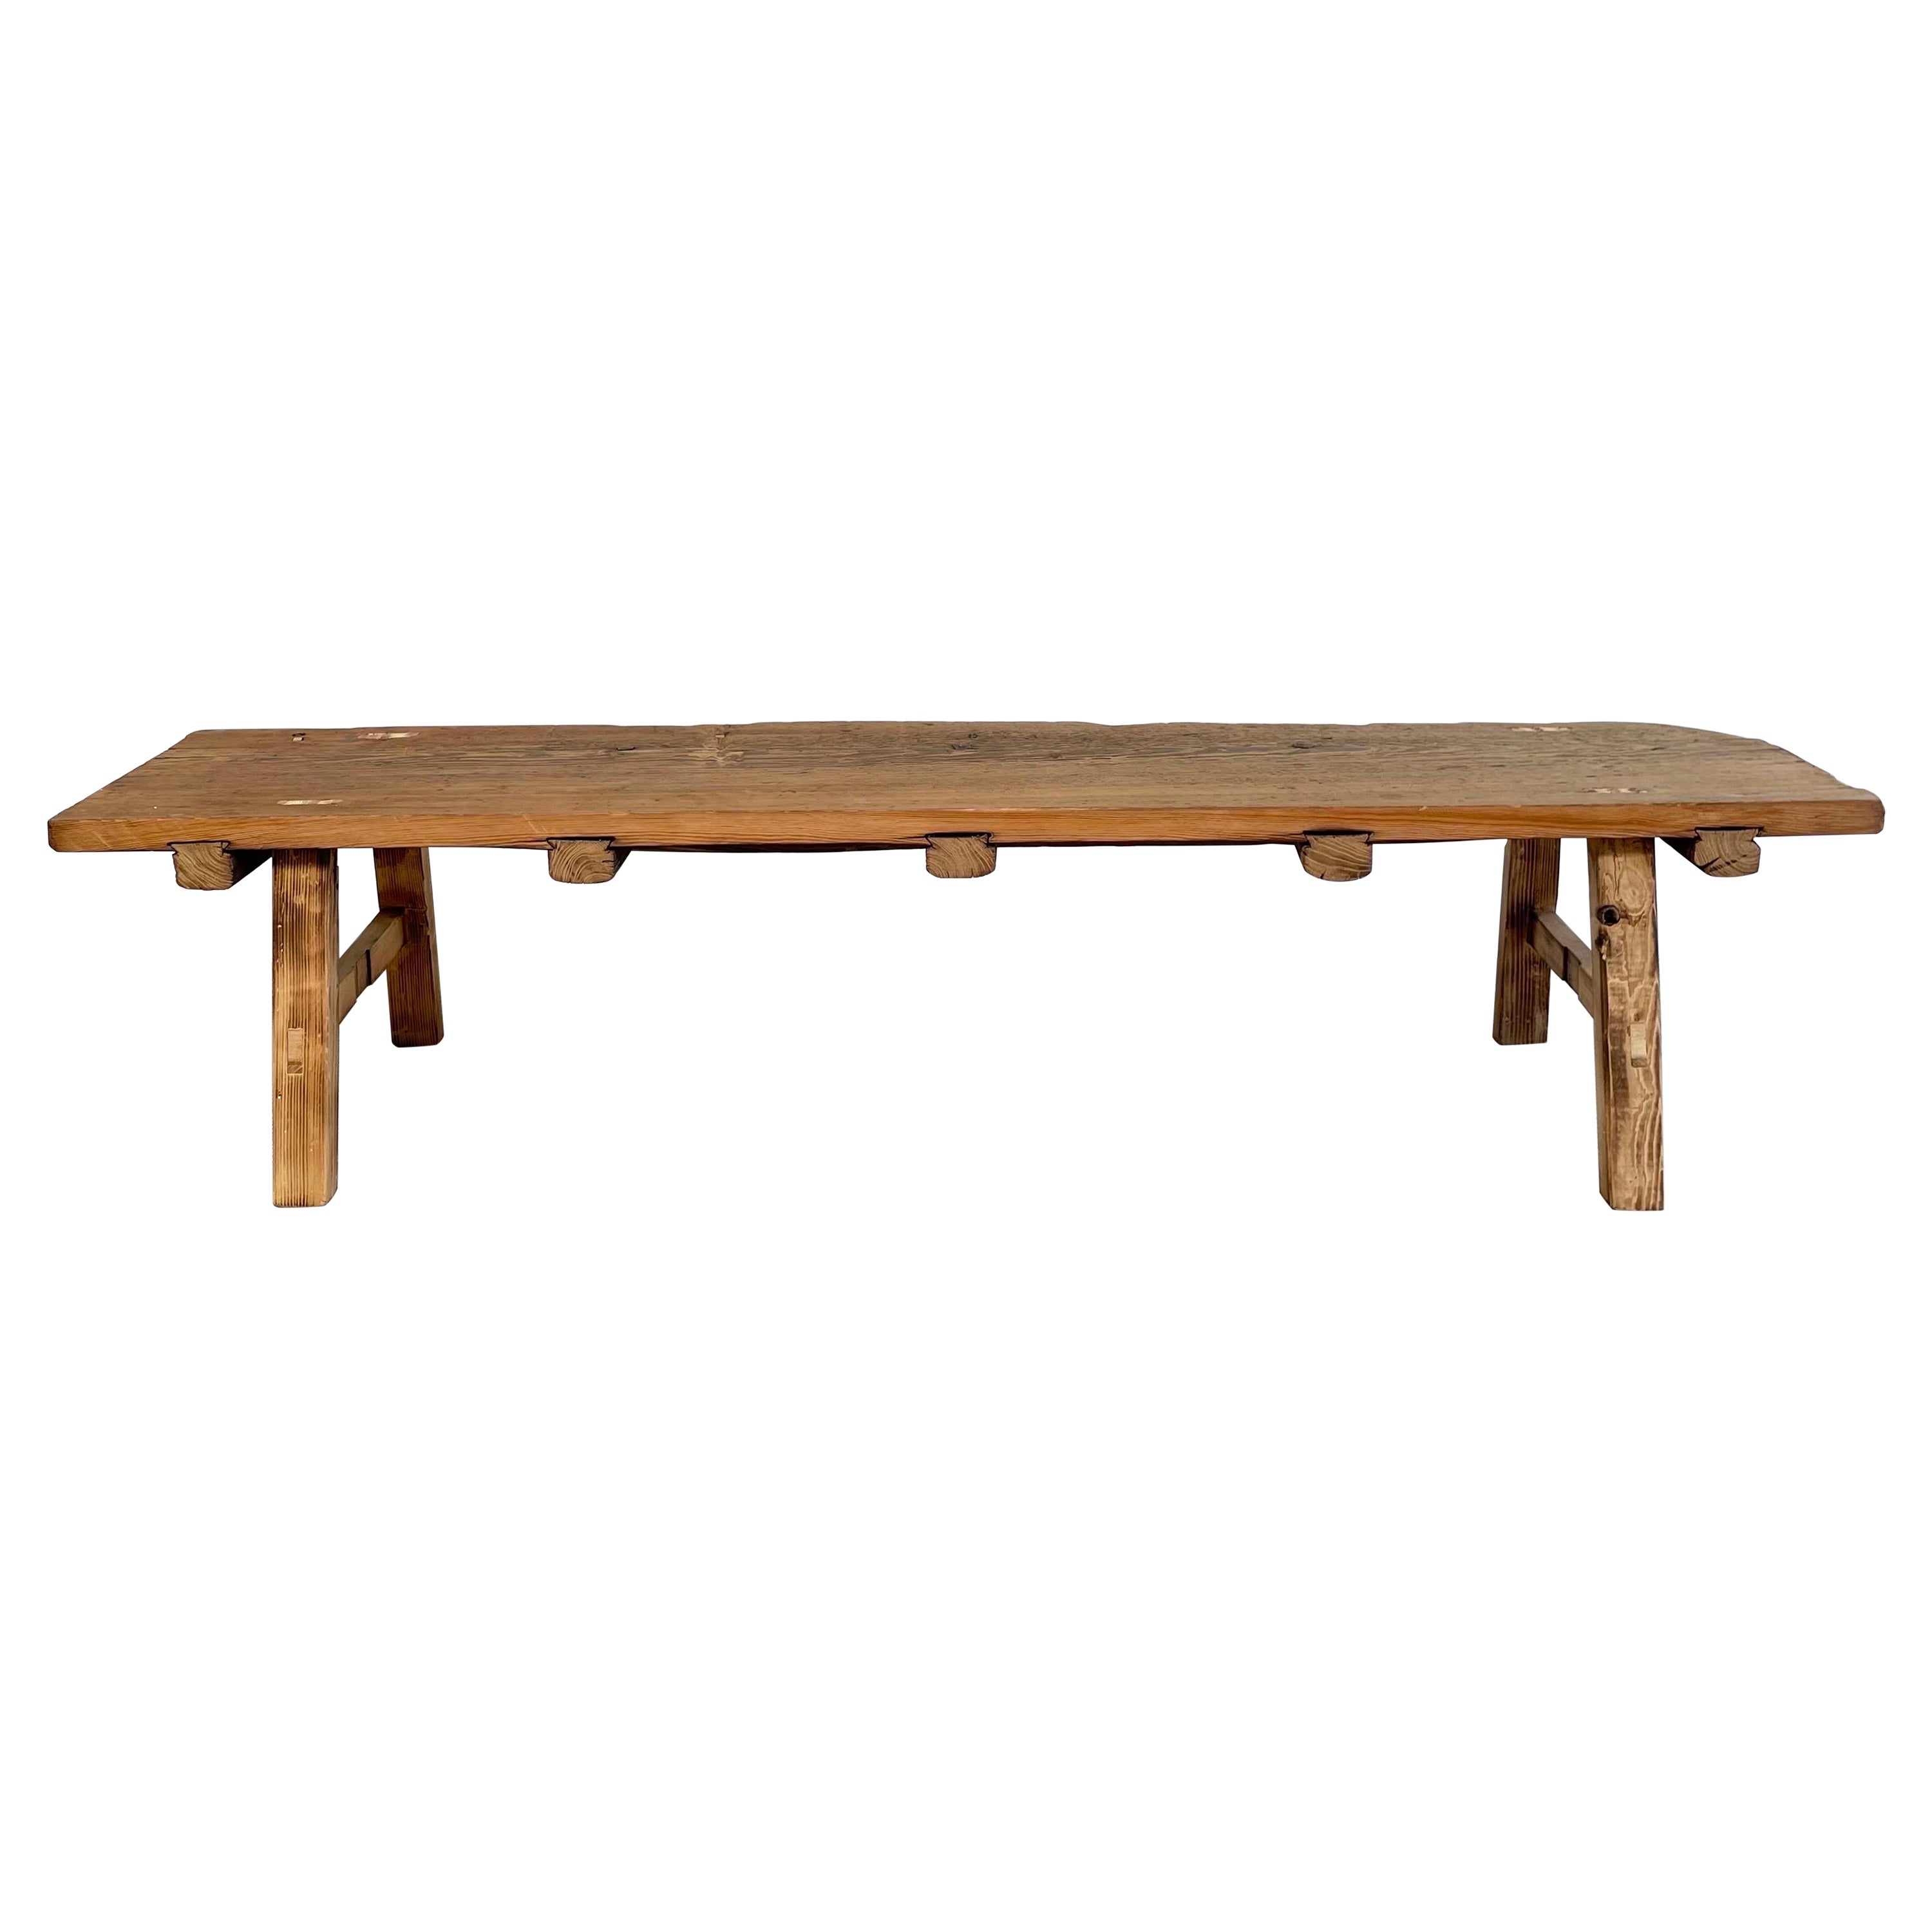 Vintage Elm Wood Coffee Table or Wide Seat Bench For Sale